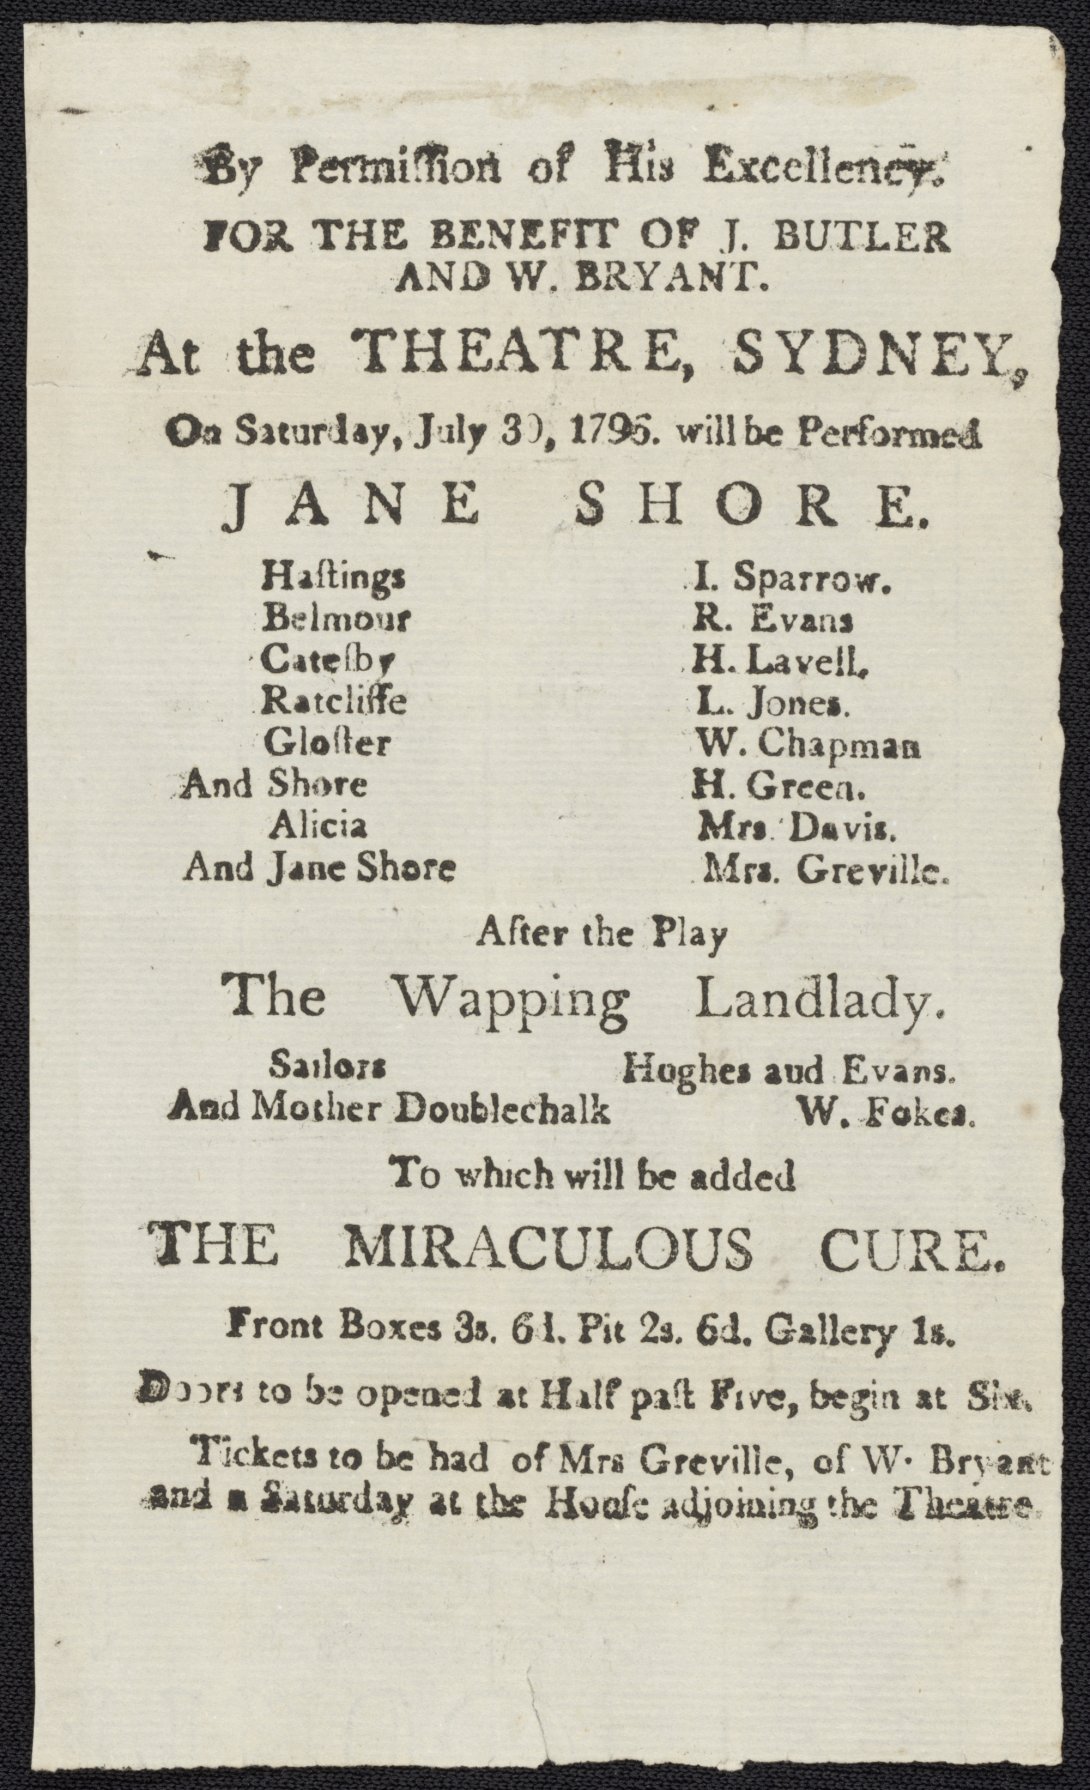 A theatre playbill from 1796, the earliest surviving document printed in Australia.